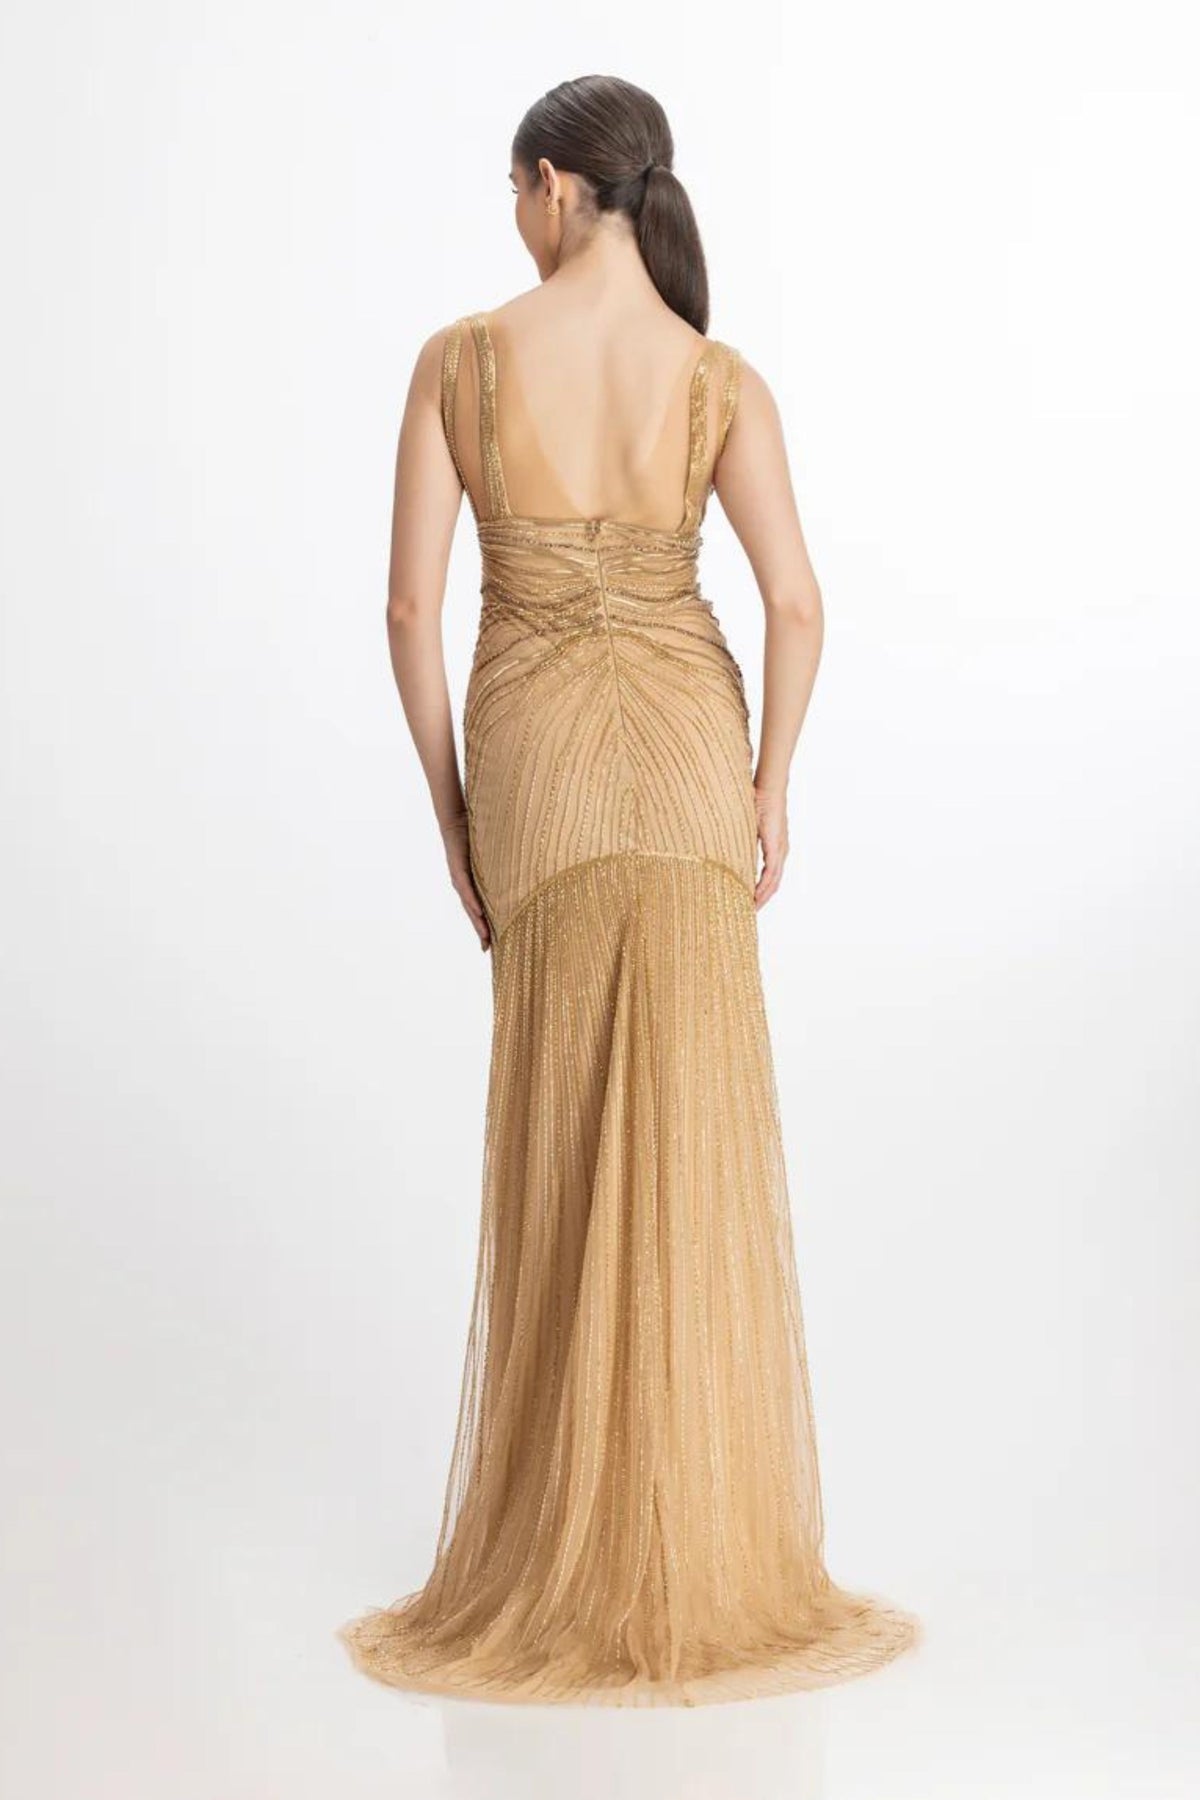 Gold slit gown